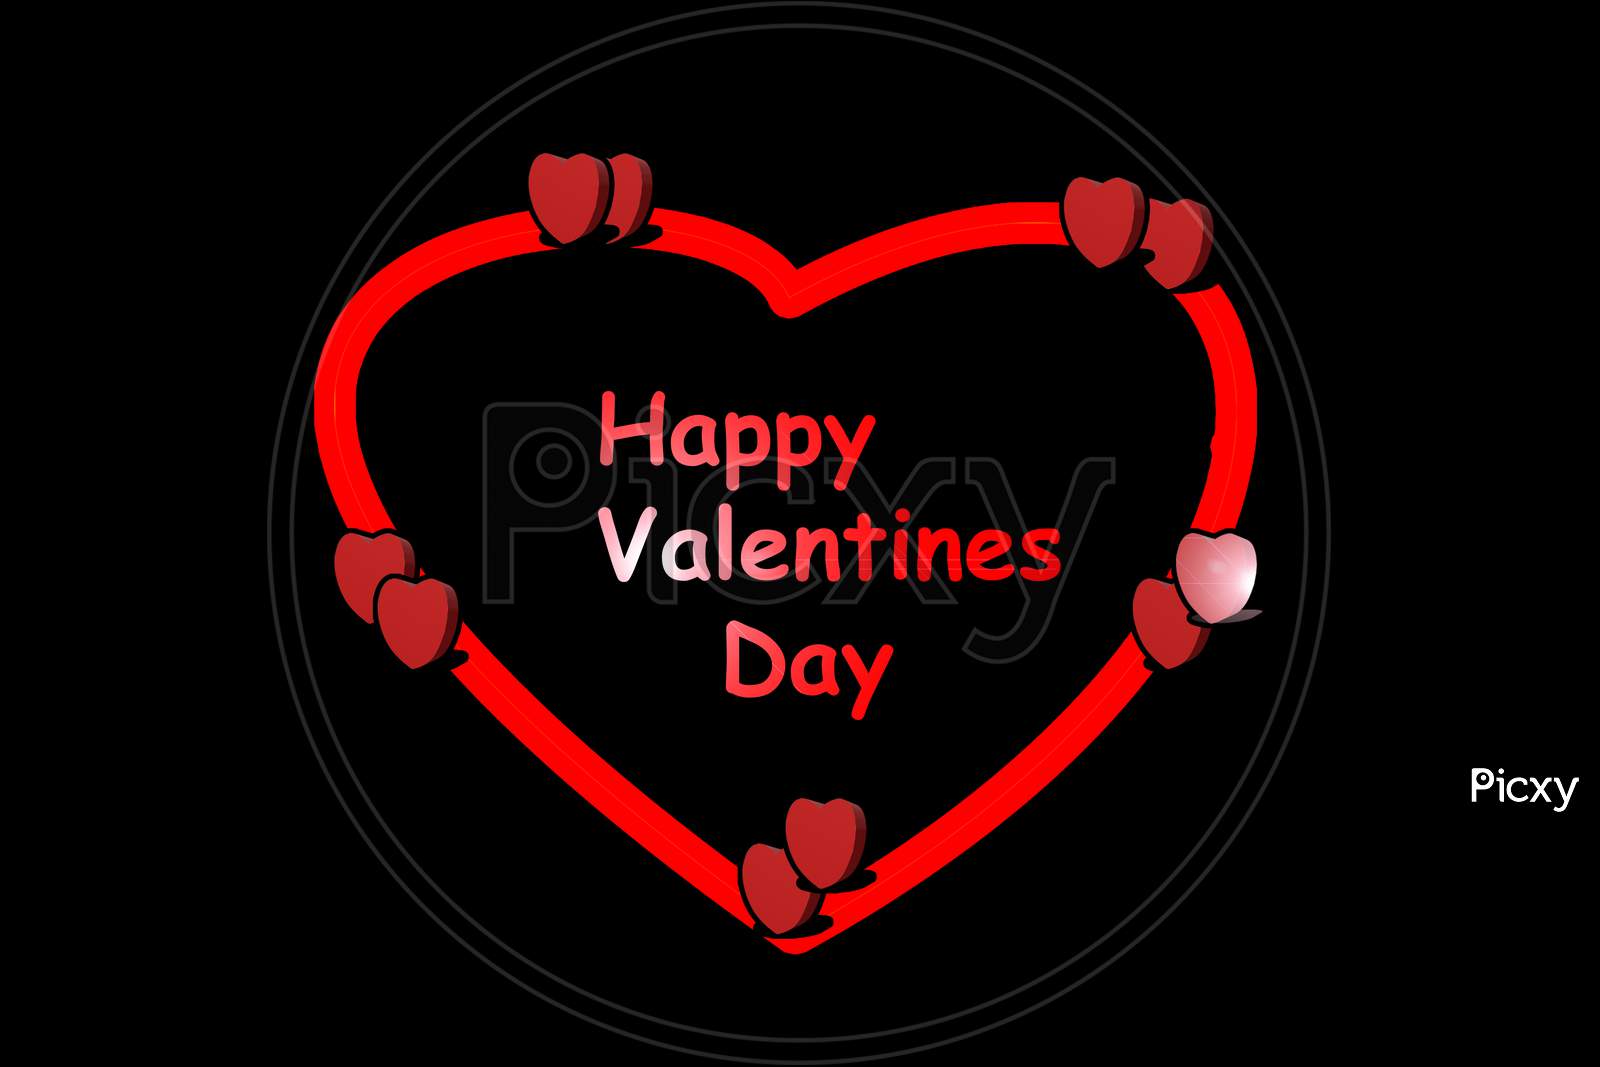 Image Of Happy Valentines Day Red Heart Shape On Black Background Wallpaper Design NL729981 Picxy